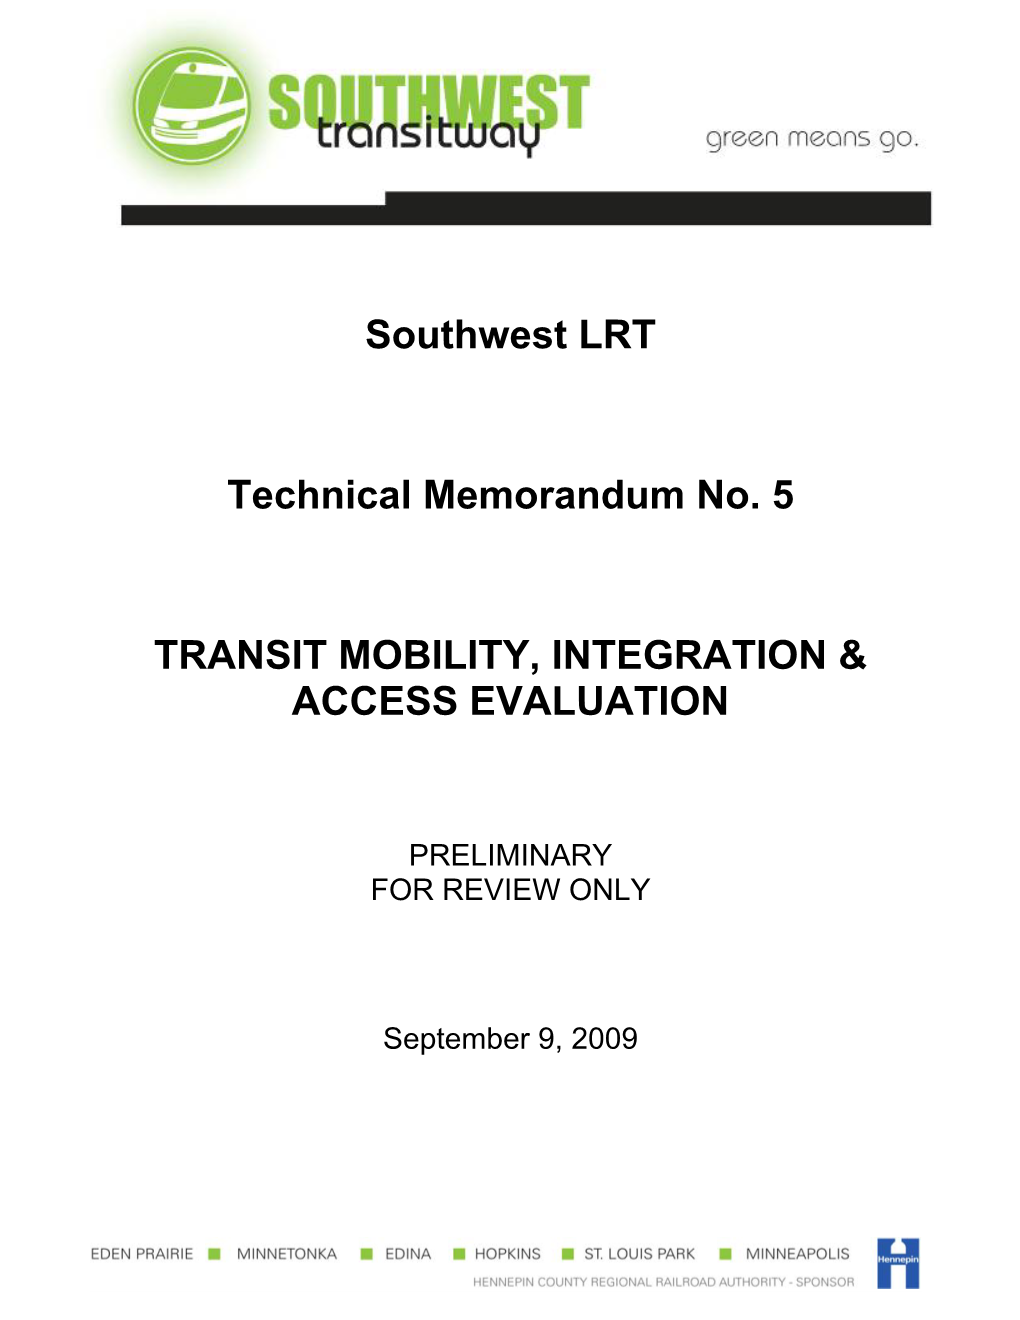 Transit Mobility, Integration and Access Evaluation